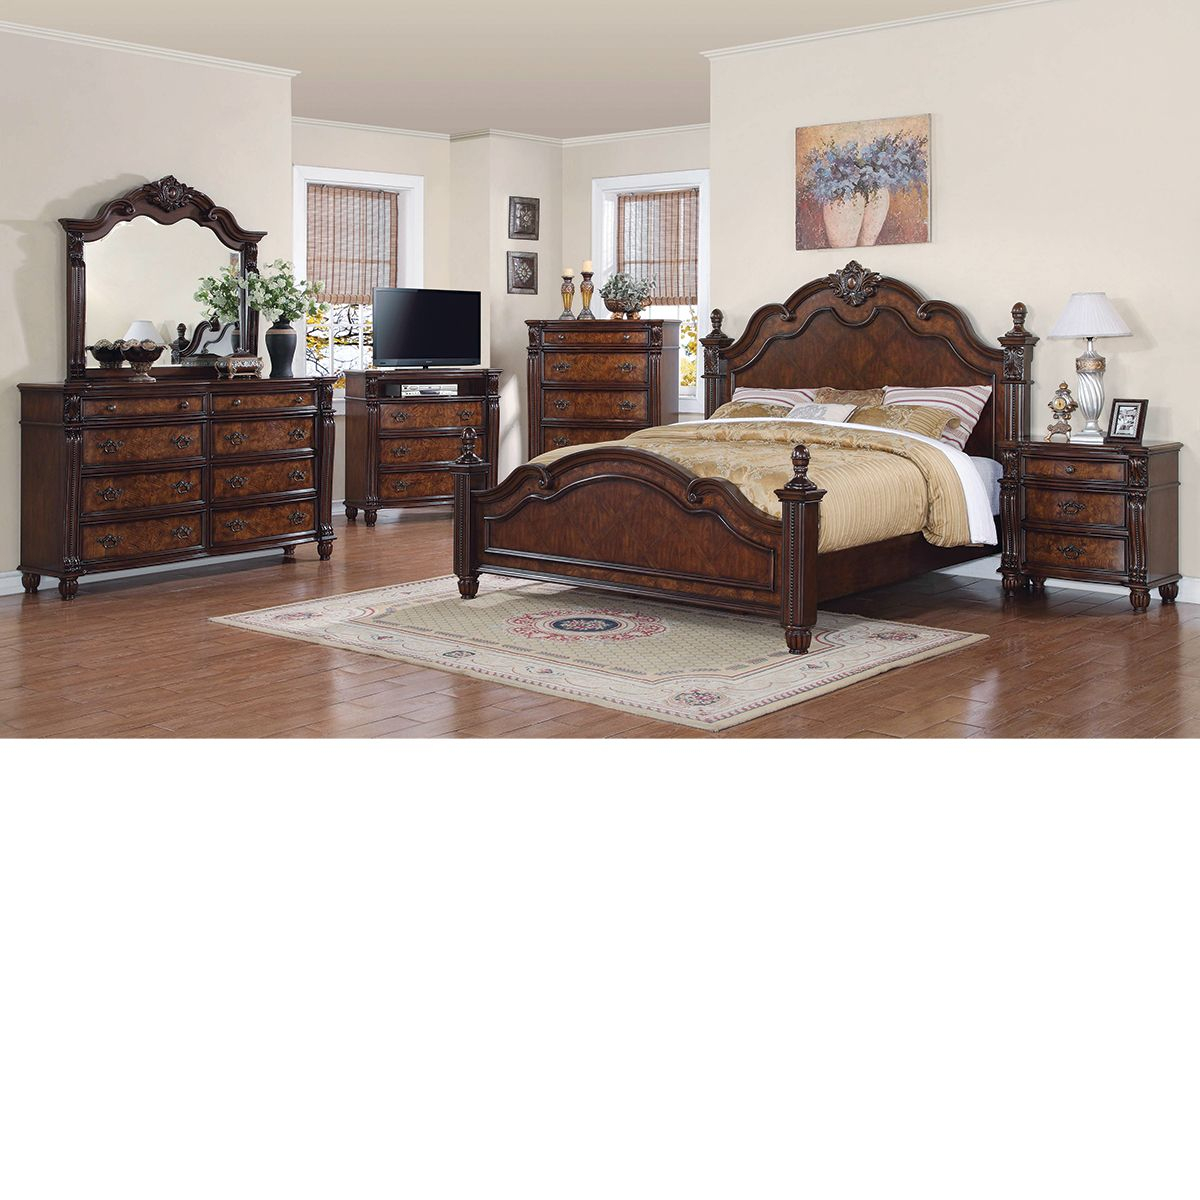 The Dump Furniture Outlet Beladora Take Me Home Dump Furniture in proportions 1200 X 1200